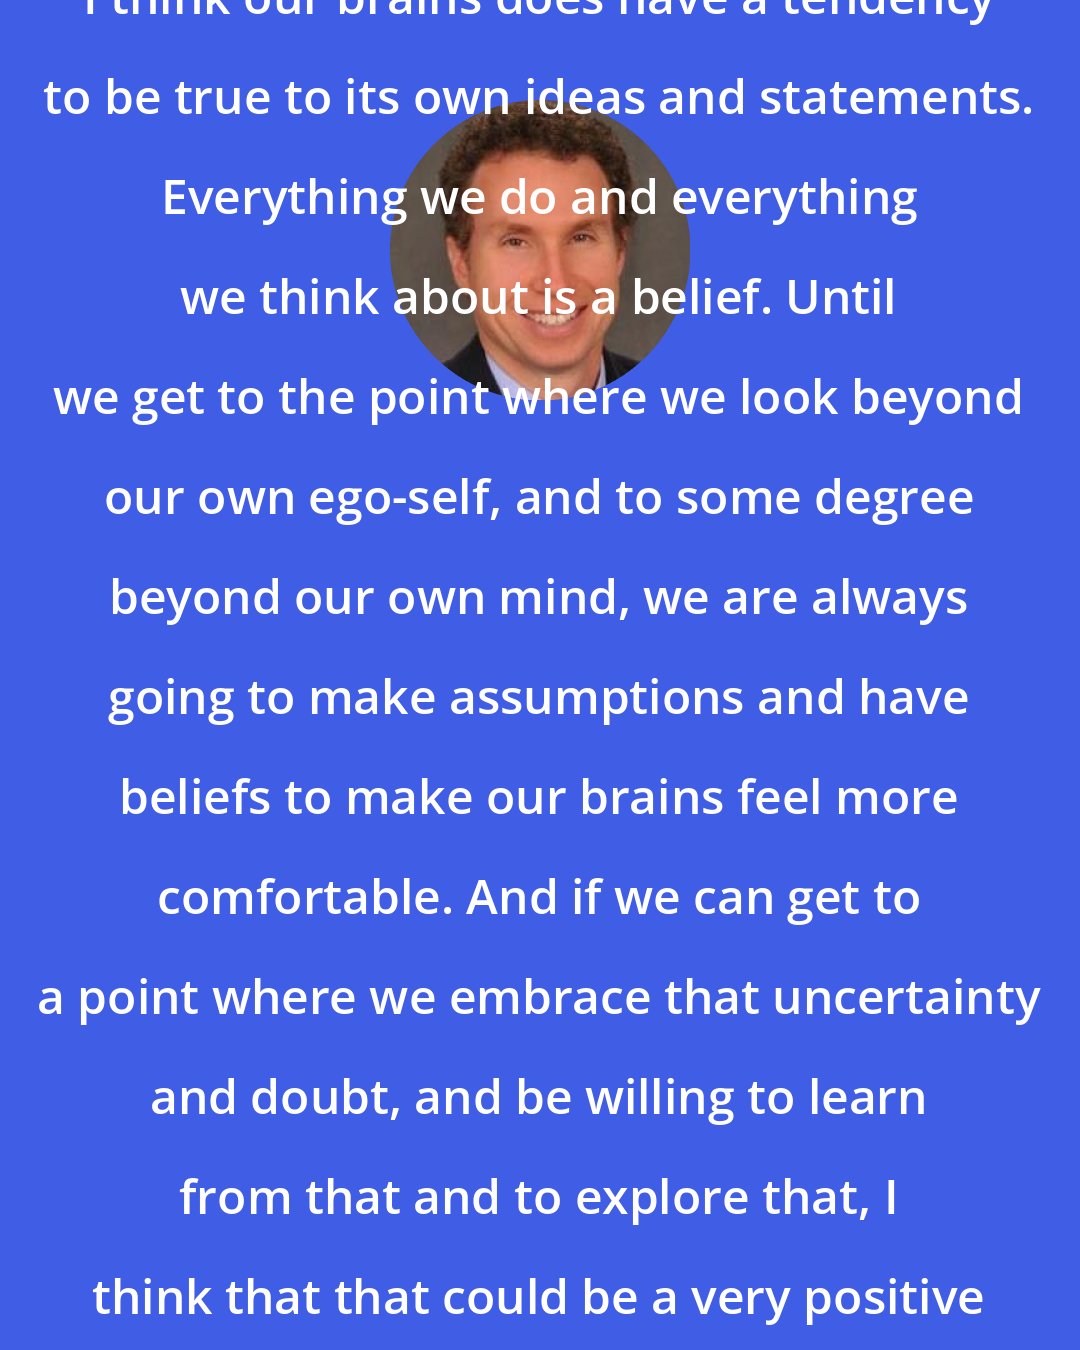 Andrew B. Newberg: I think our brains does have a tendency to be true to its own ideas and statements. Everything we do and everything we think about is a belief. Until we get to the point where we look beyond our own ego-self, and to some degree beyond our own mind, we are always going to make assumptions and have beliefs to make our brains feel more comfortable. And if we can get to a point where we embrace that uncertainty and doubt, and be willing to learn from that and to explore that, I think that that could be a very positive experience.